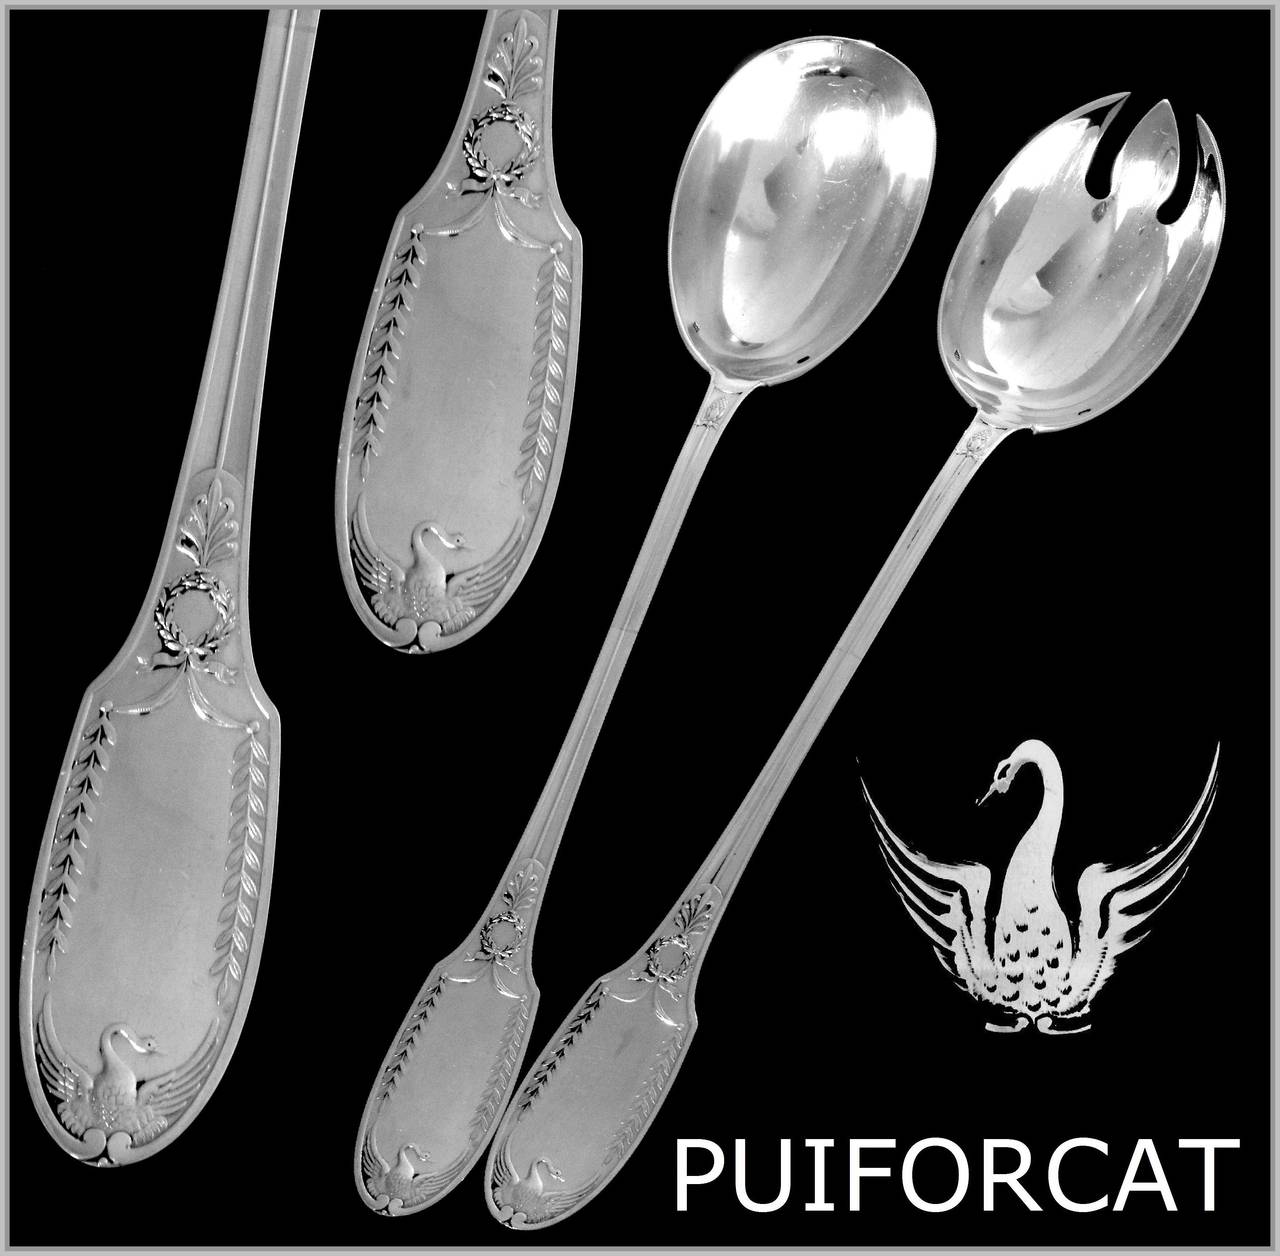 Puiforcat French All Sterling Silver Salad Serving Set 2 pc Empire, Swans

Head of Minerva 1 st titre for 950/1000 French Sterling Silver guarantee.

This salad serving set comprises a three-tined fork and a spoon with the polylobed bowl. The